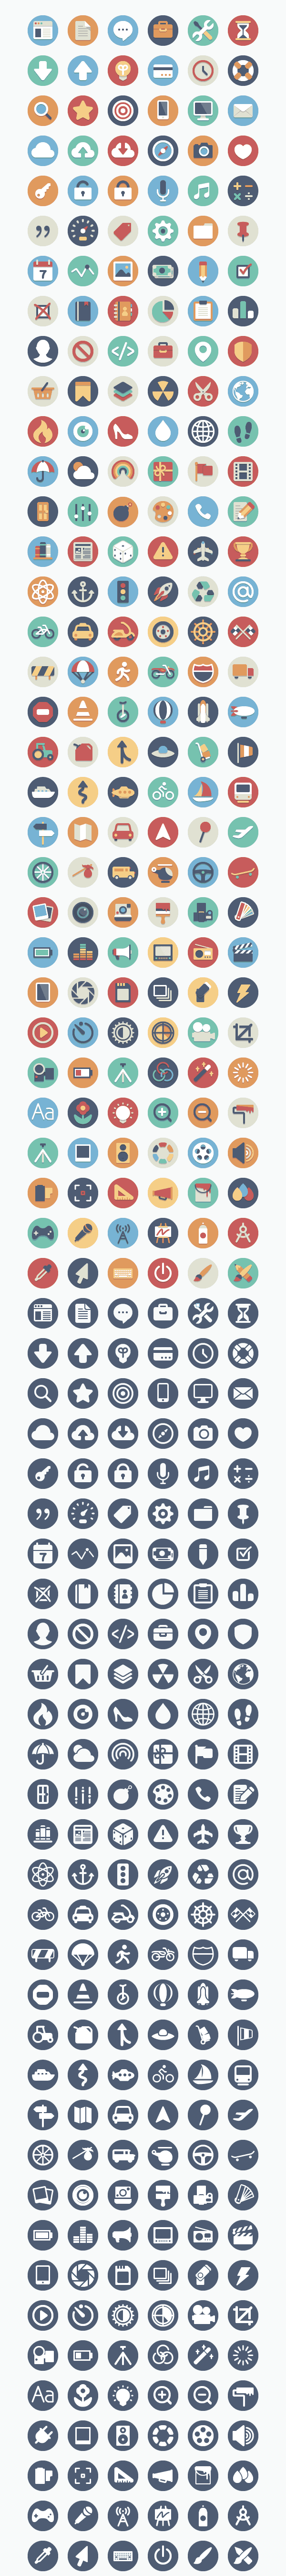 Future Icons - Free SVG & PNG Future Images - Noun Project